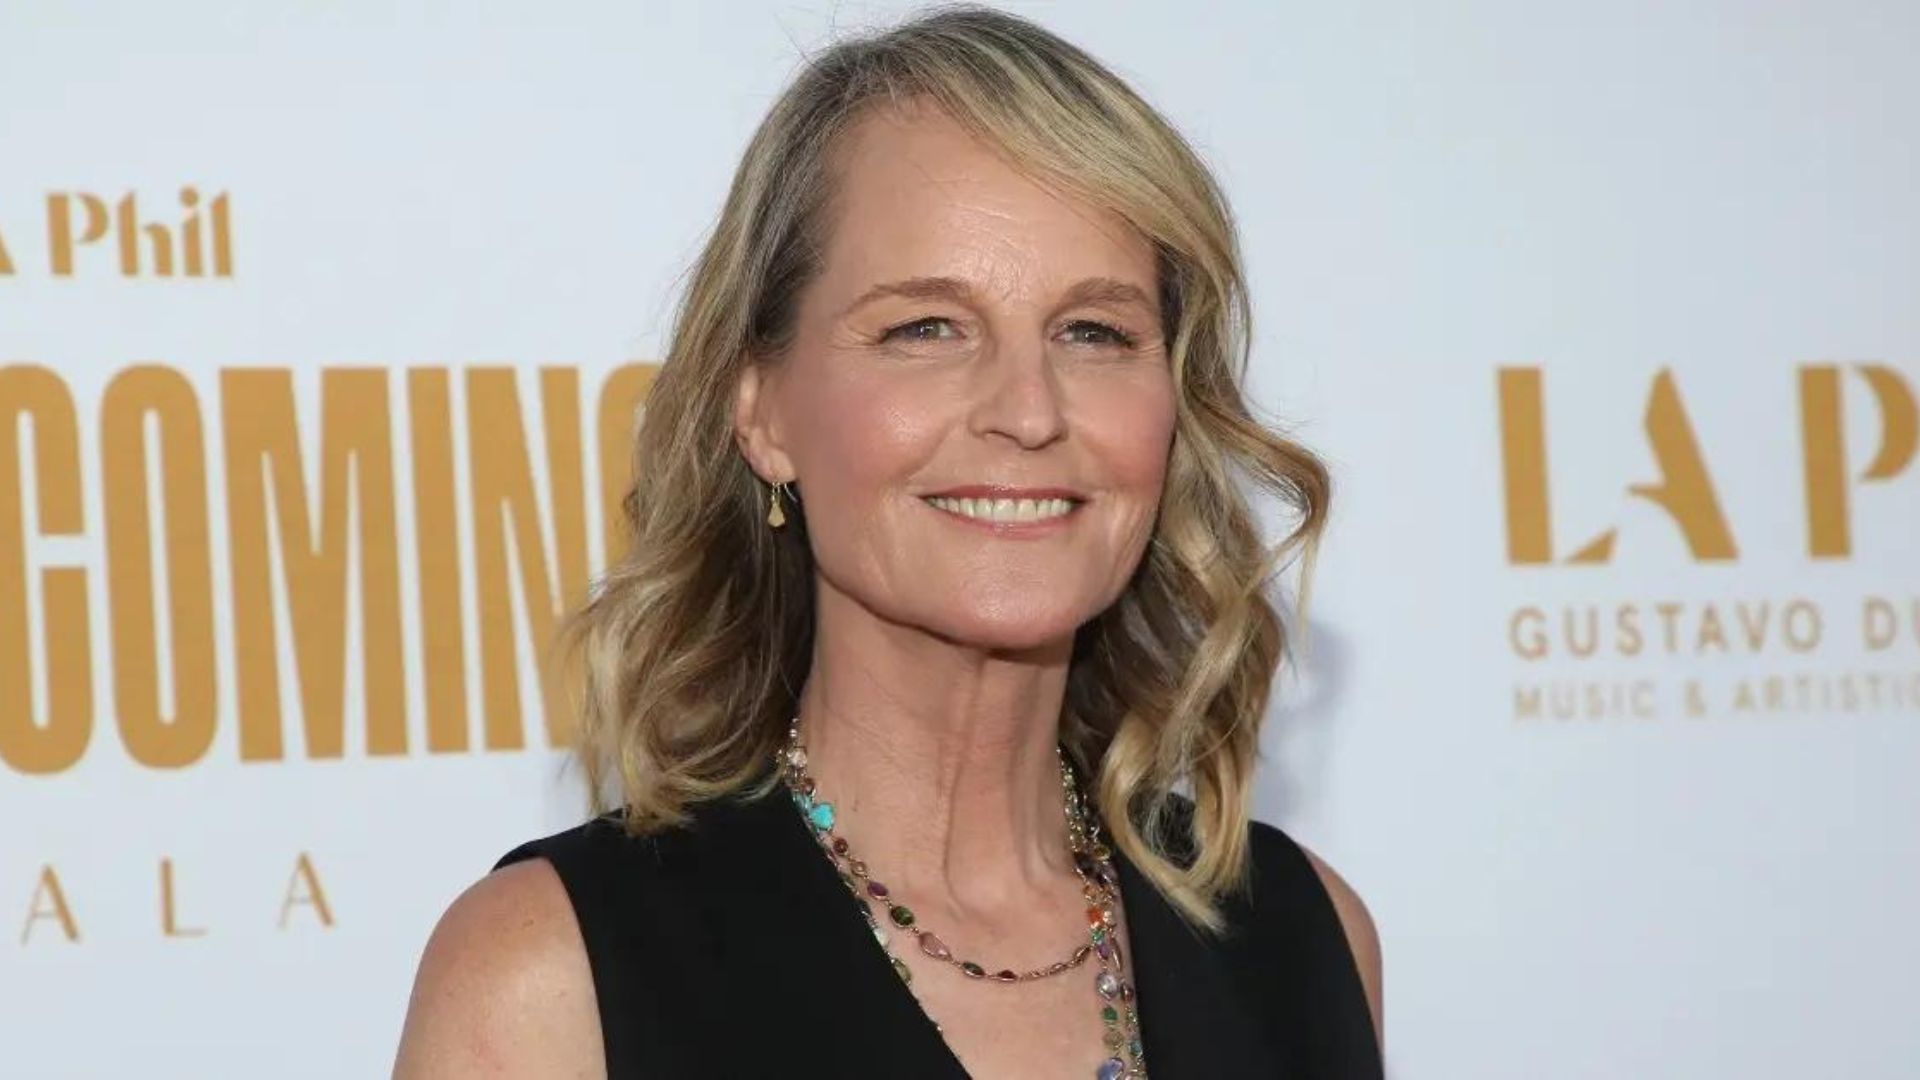 Helen Hunt Smiling And White Poster In Background